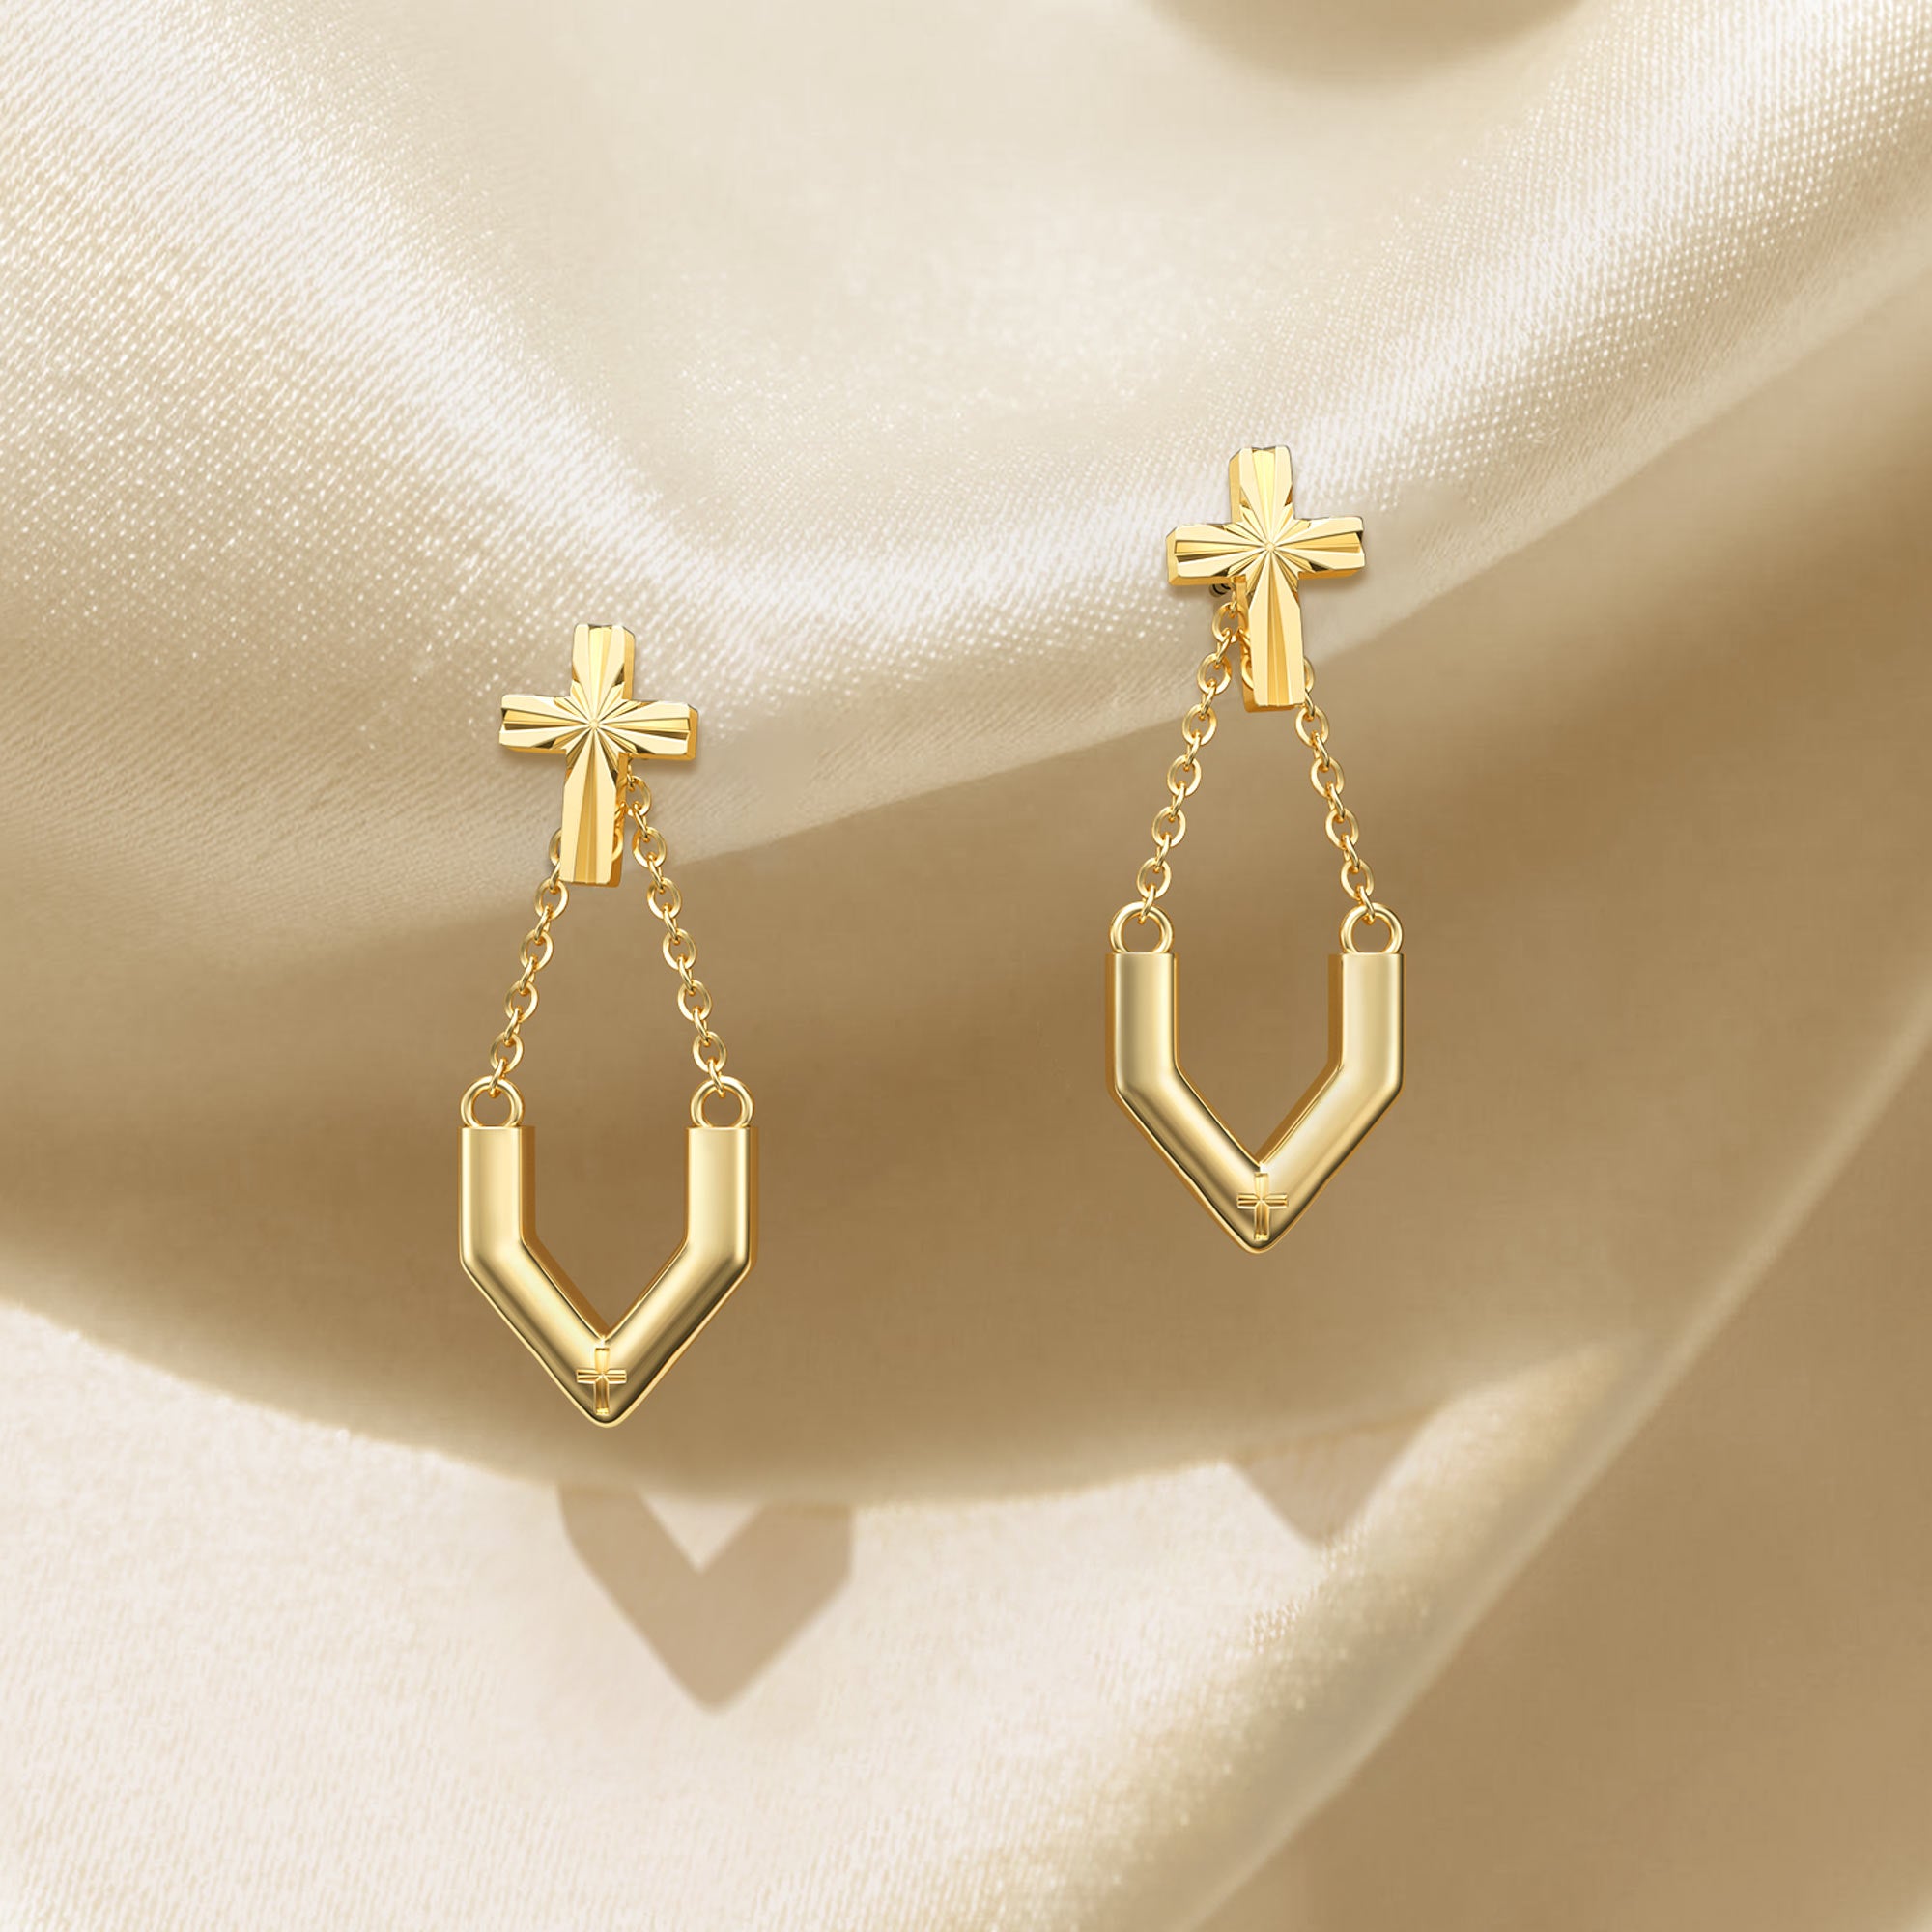 ‘Take the first step in faith' V Chain Cross Drop Earrings - vanimy